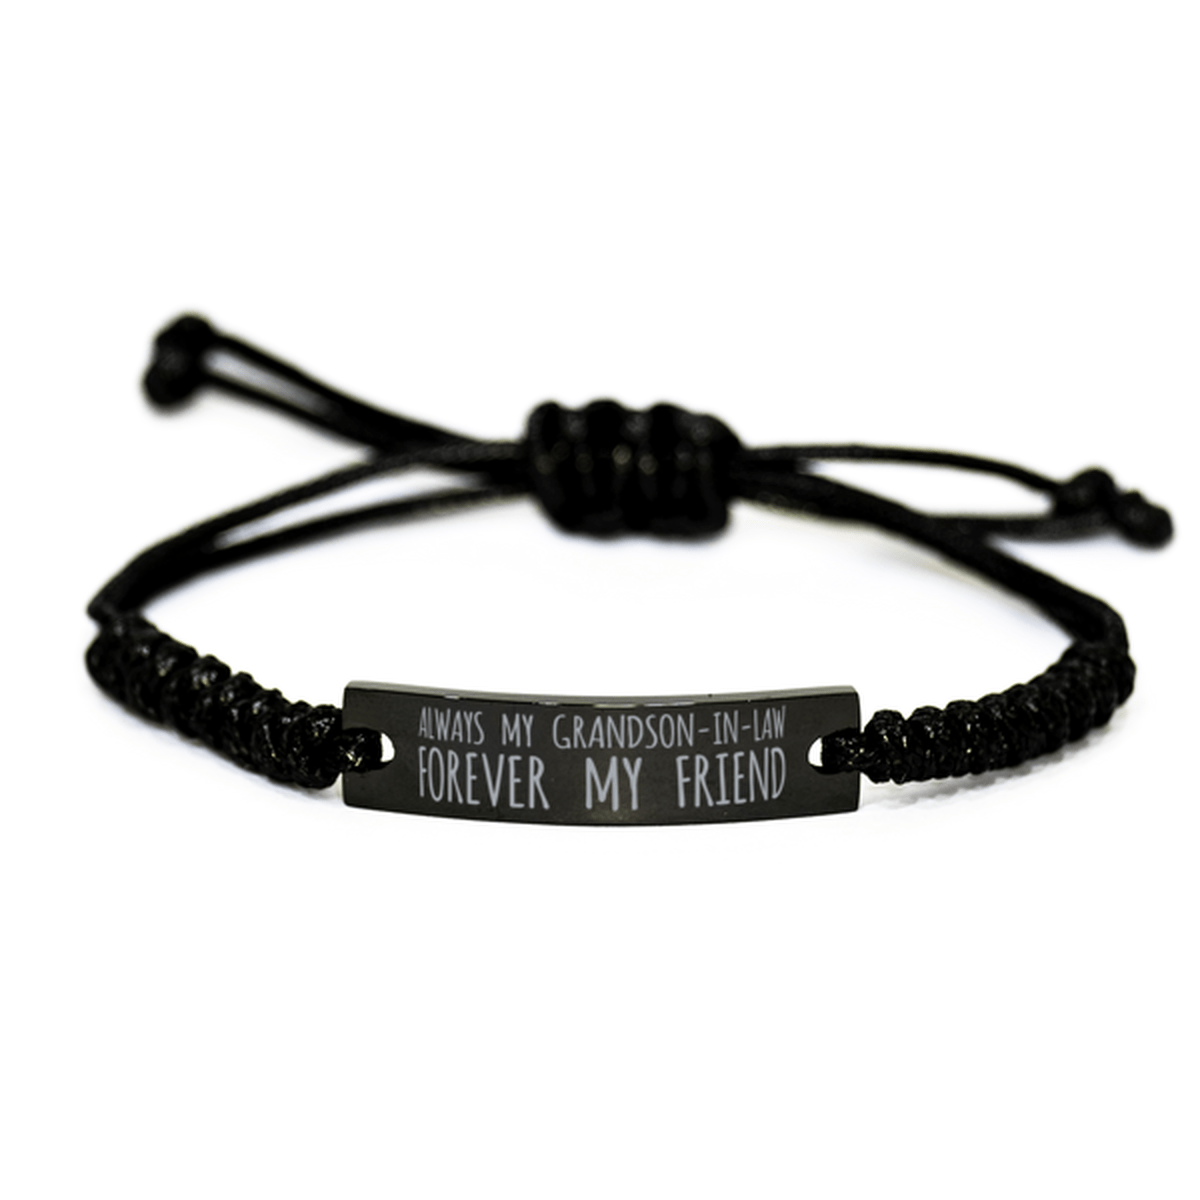 Inspirational Grandson-In-Law Black Rope Bracelet, Always My Grandson-In-Law Forever My Friend, Best Birthday Gifts For Family